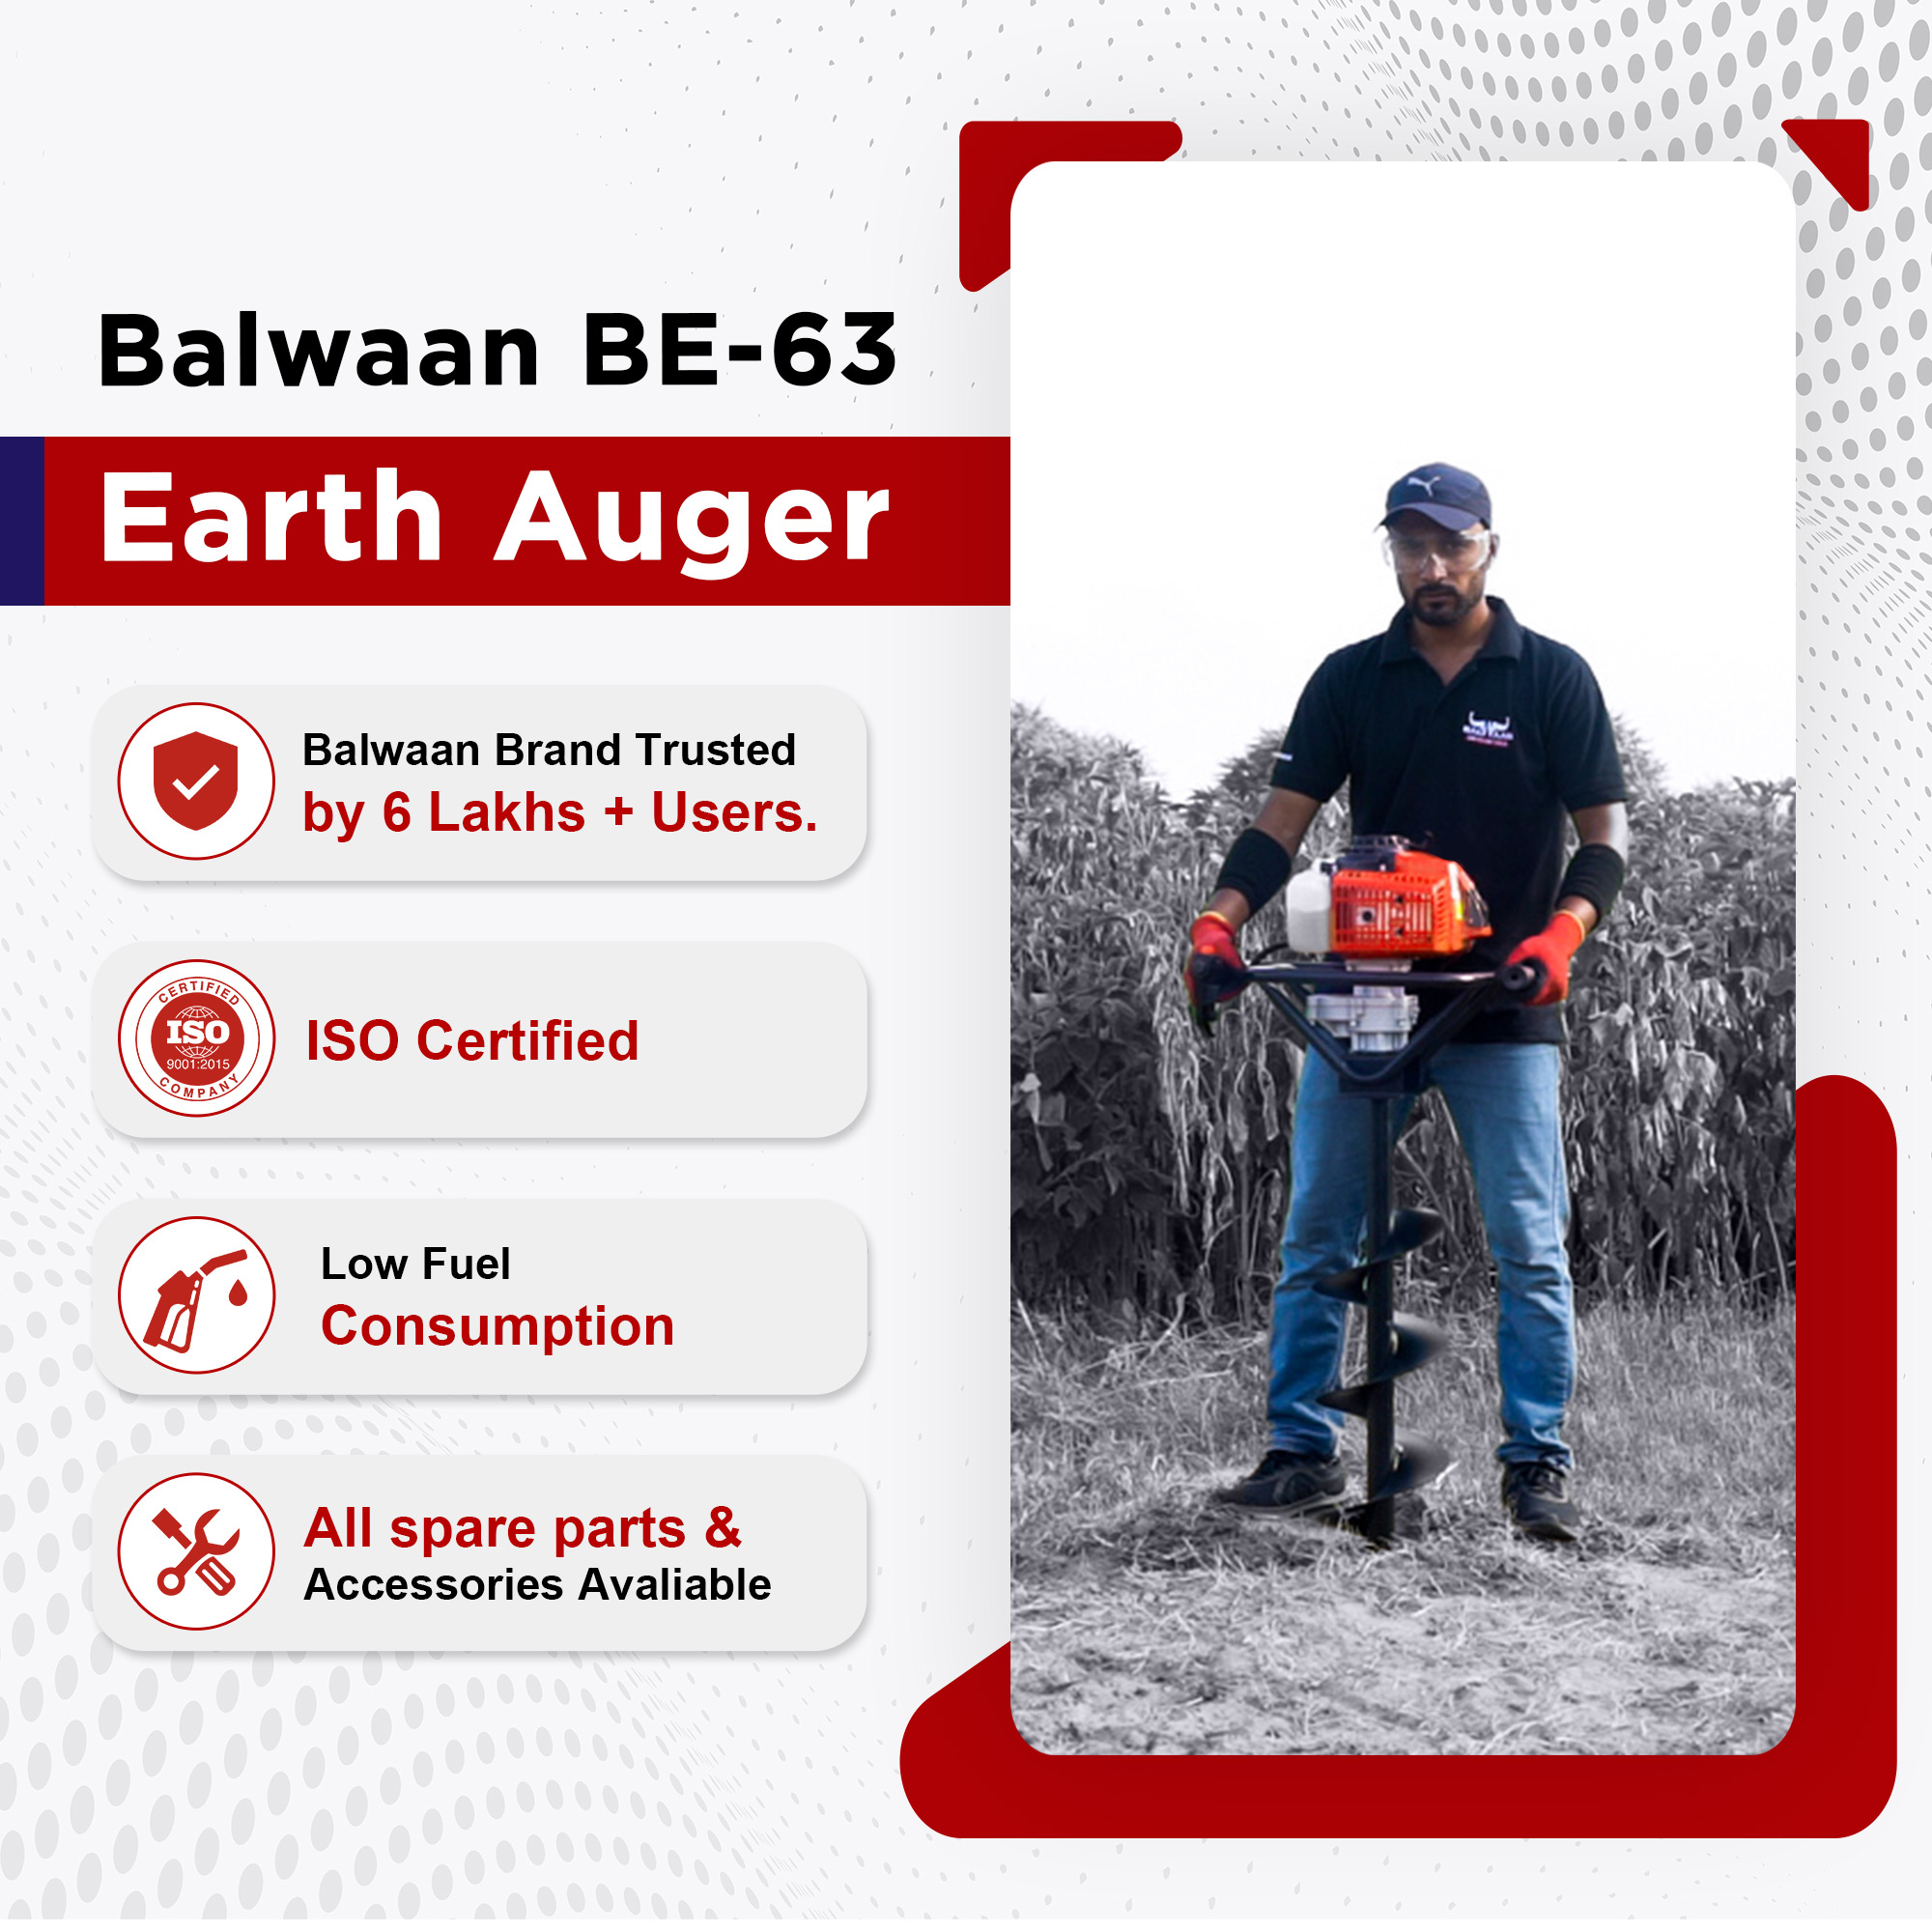 Balwaan 63cc Earth Auger (Orange) with 8 Inch & 12 Inch Planter| BE-63